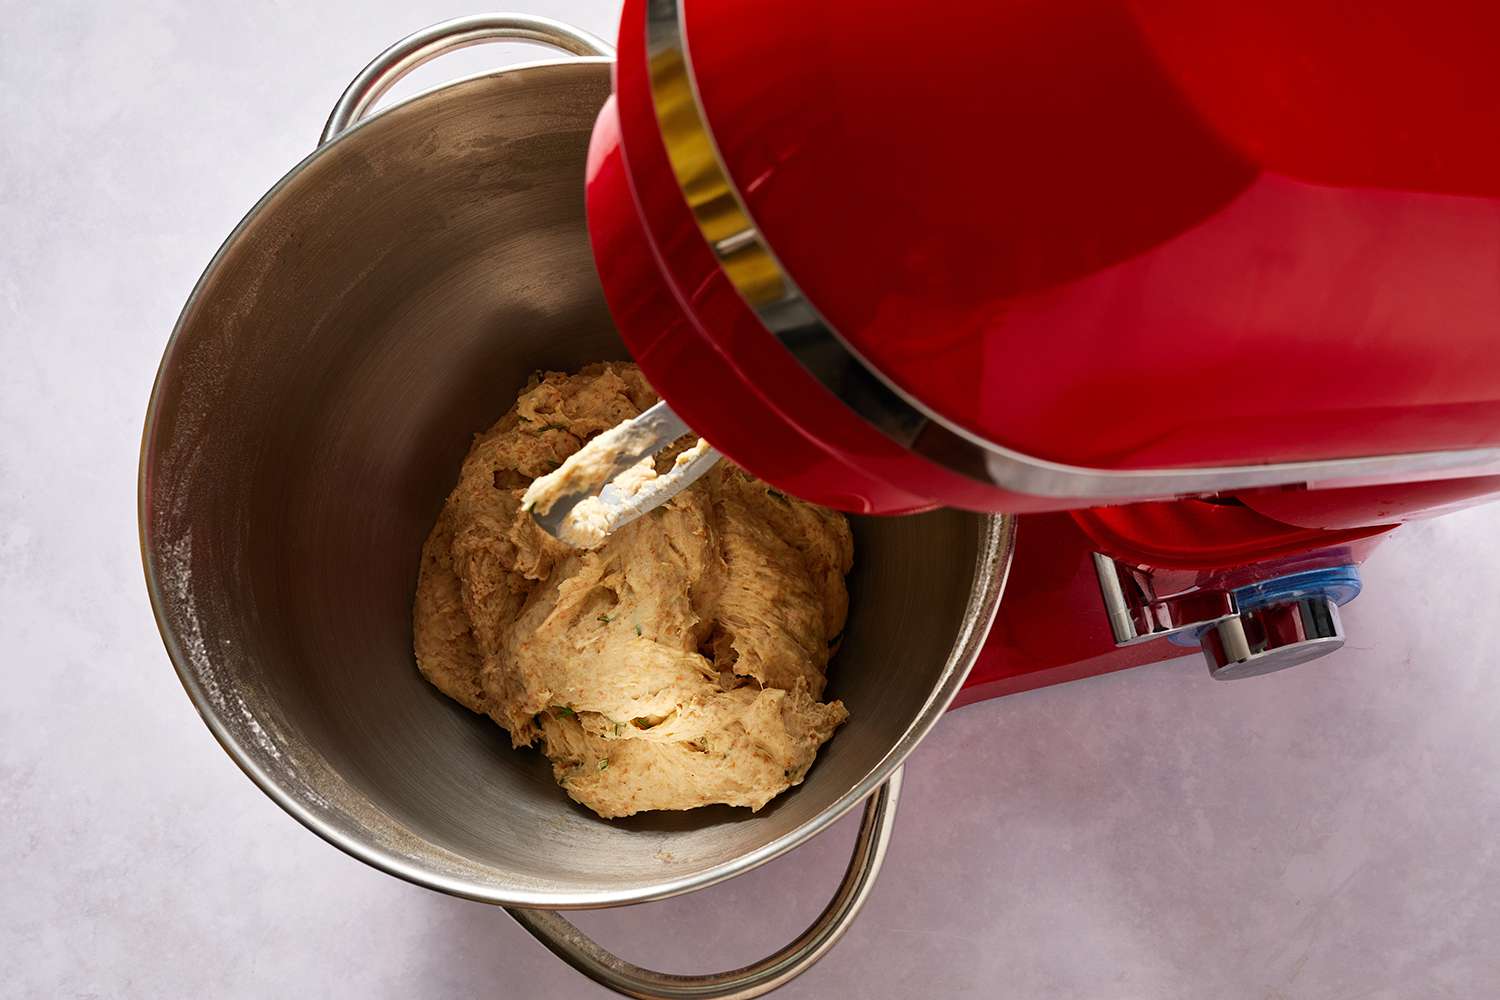 Dough in a red stand mixer 